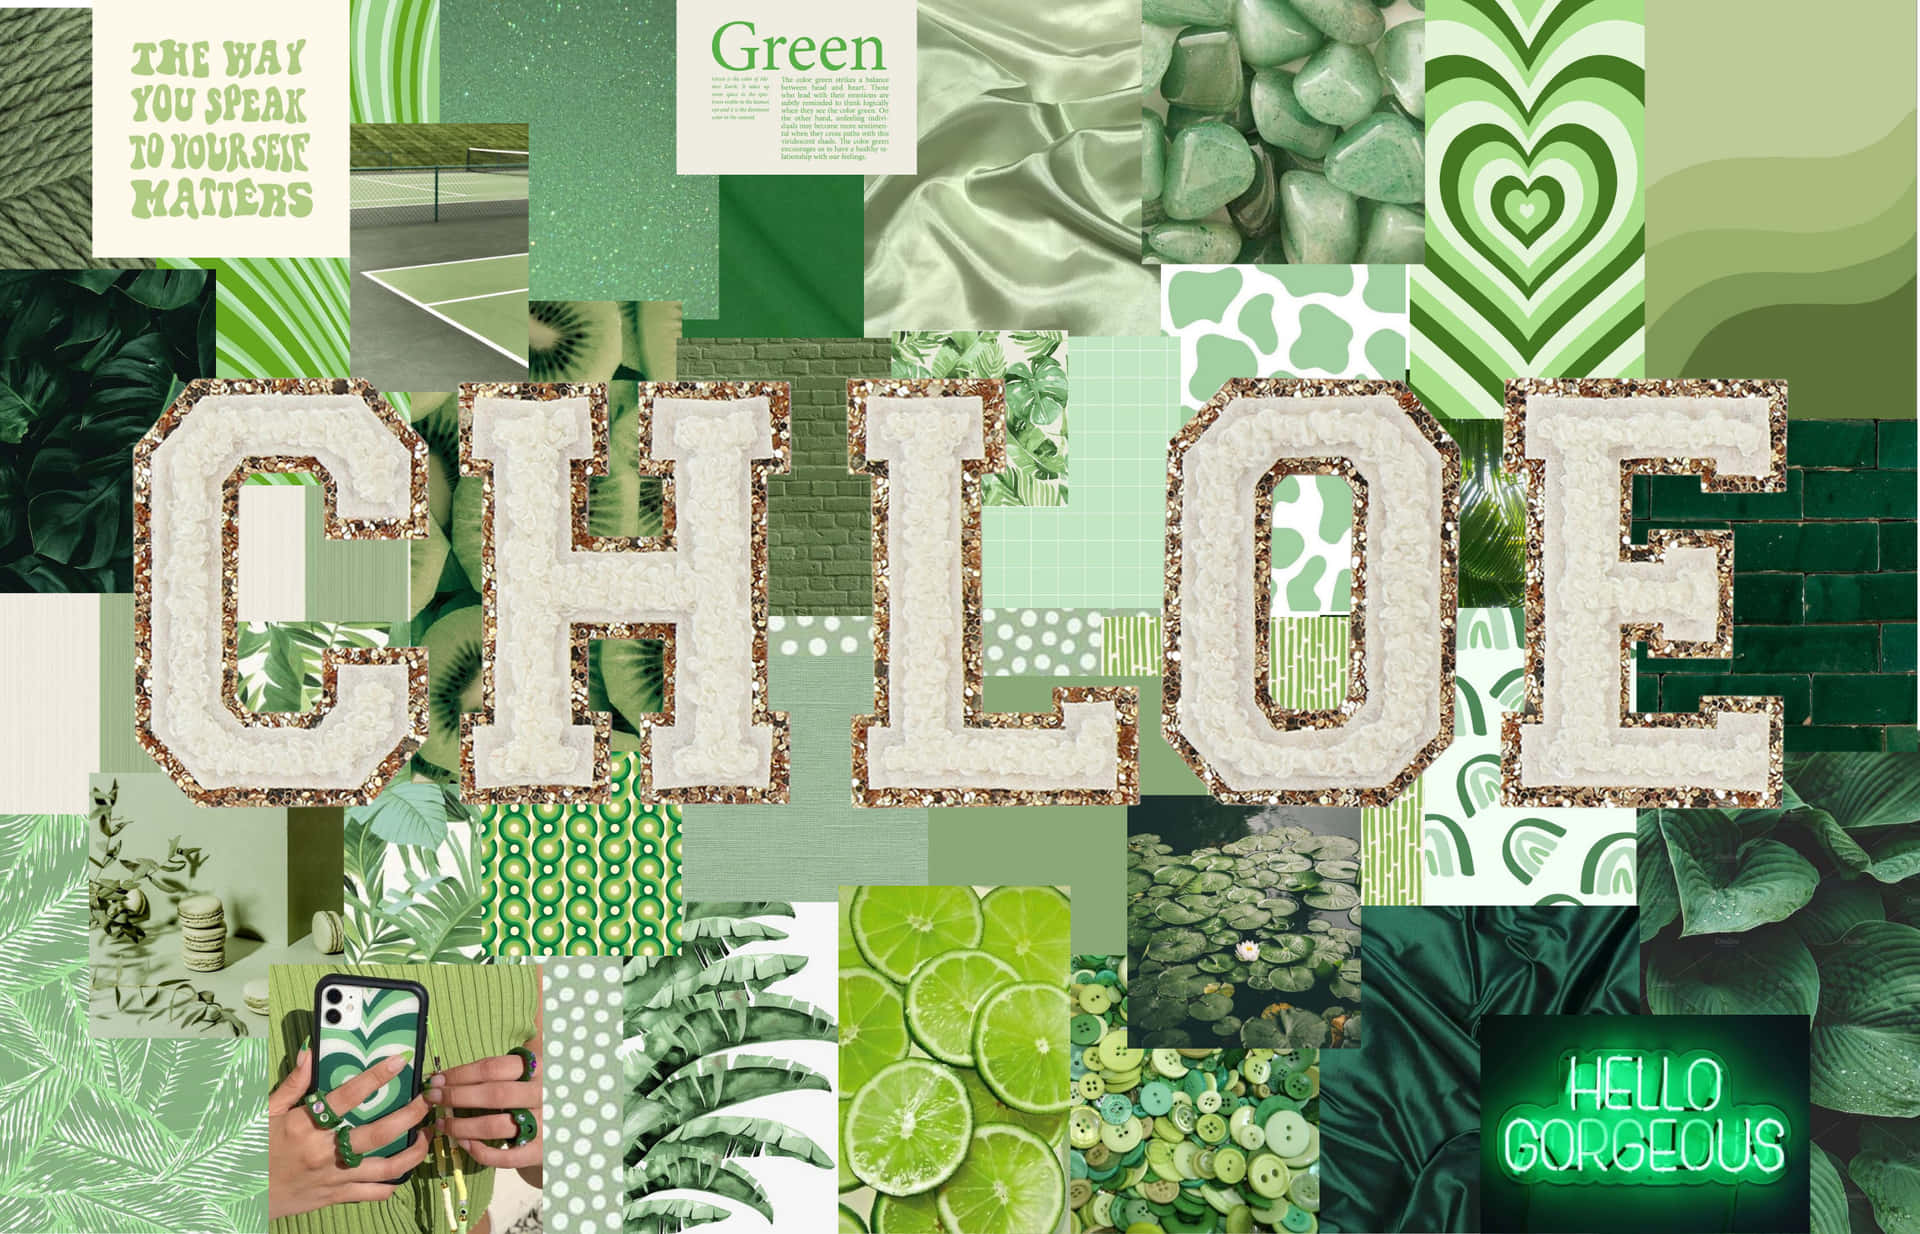 A Collage Of Green And White Images With The Word Chloe Wallpaper